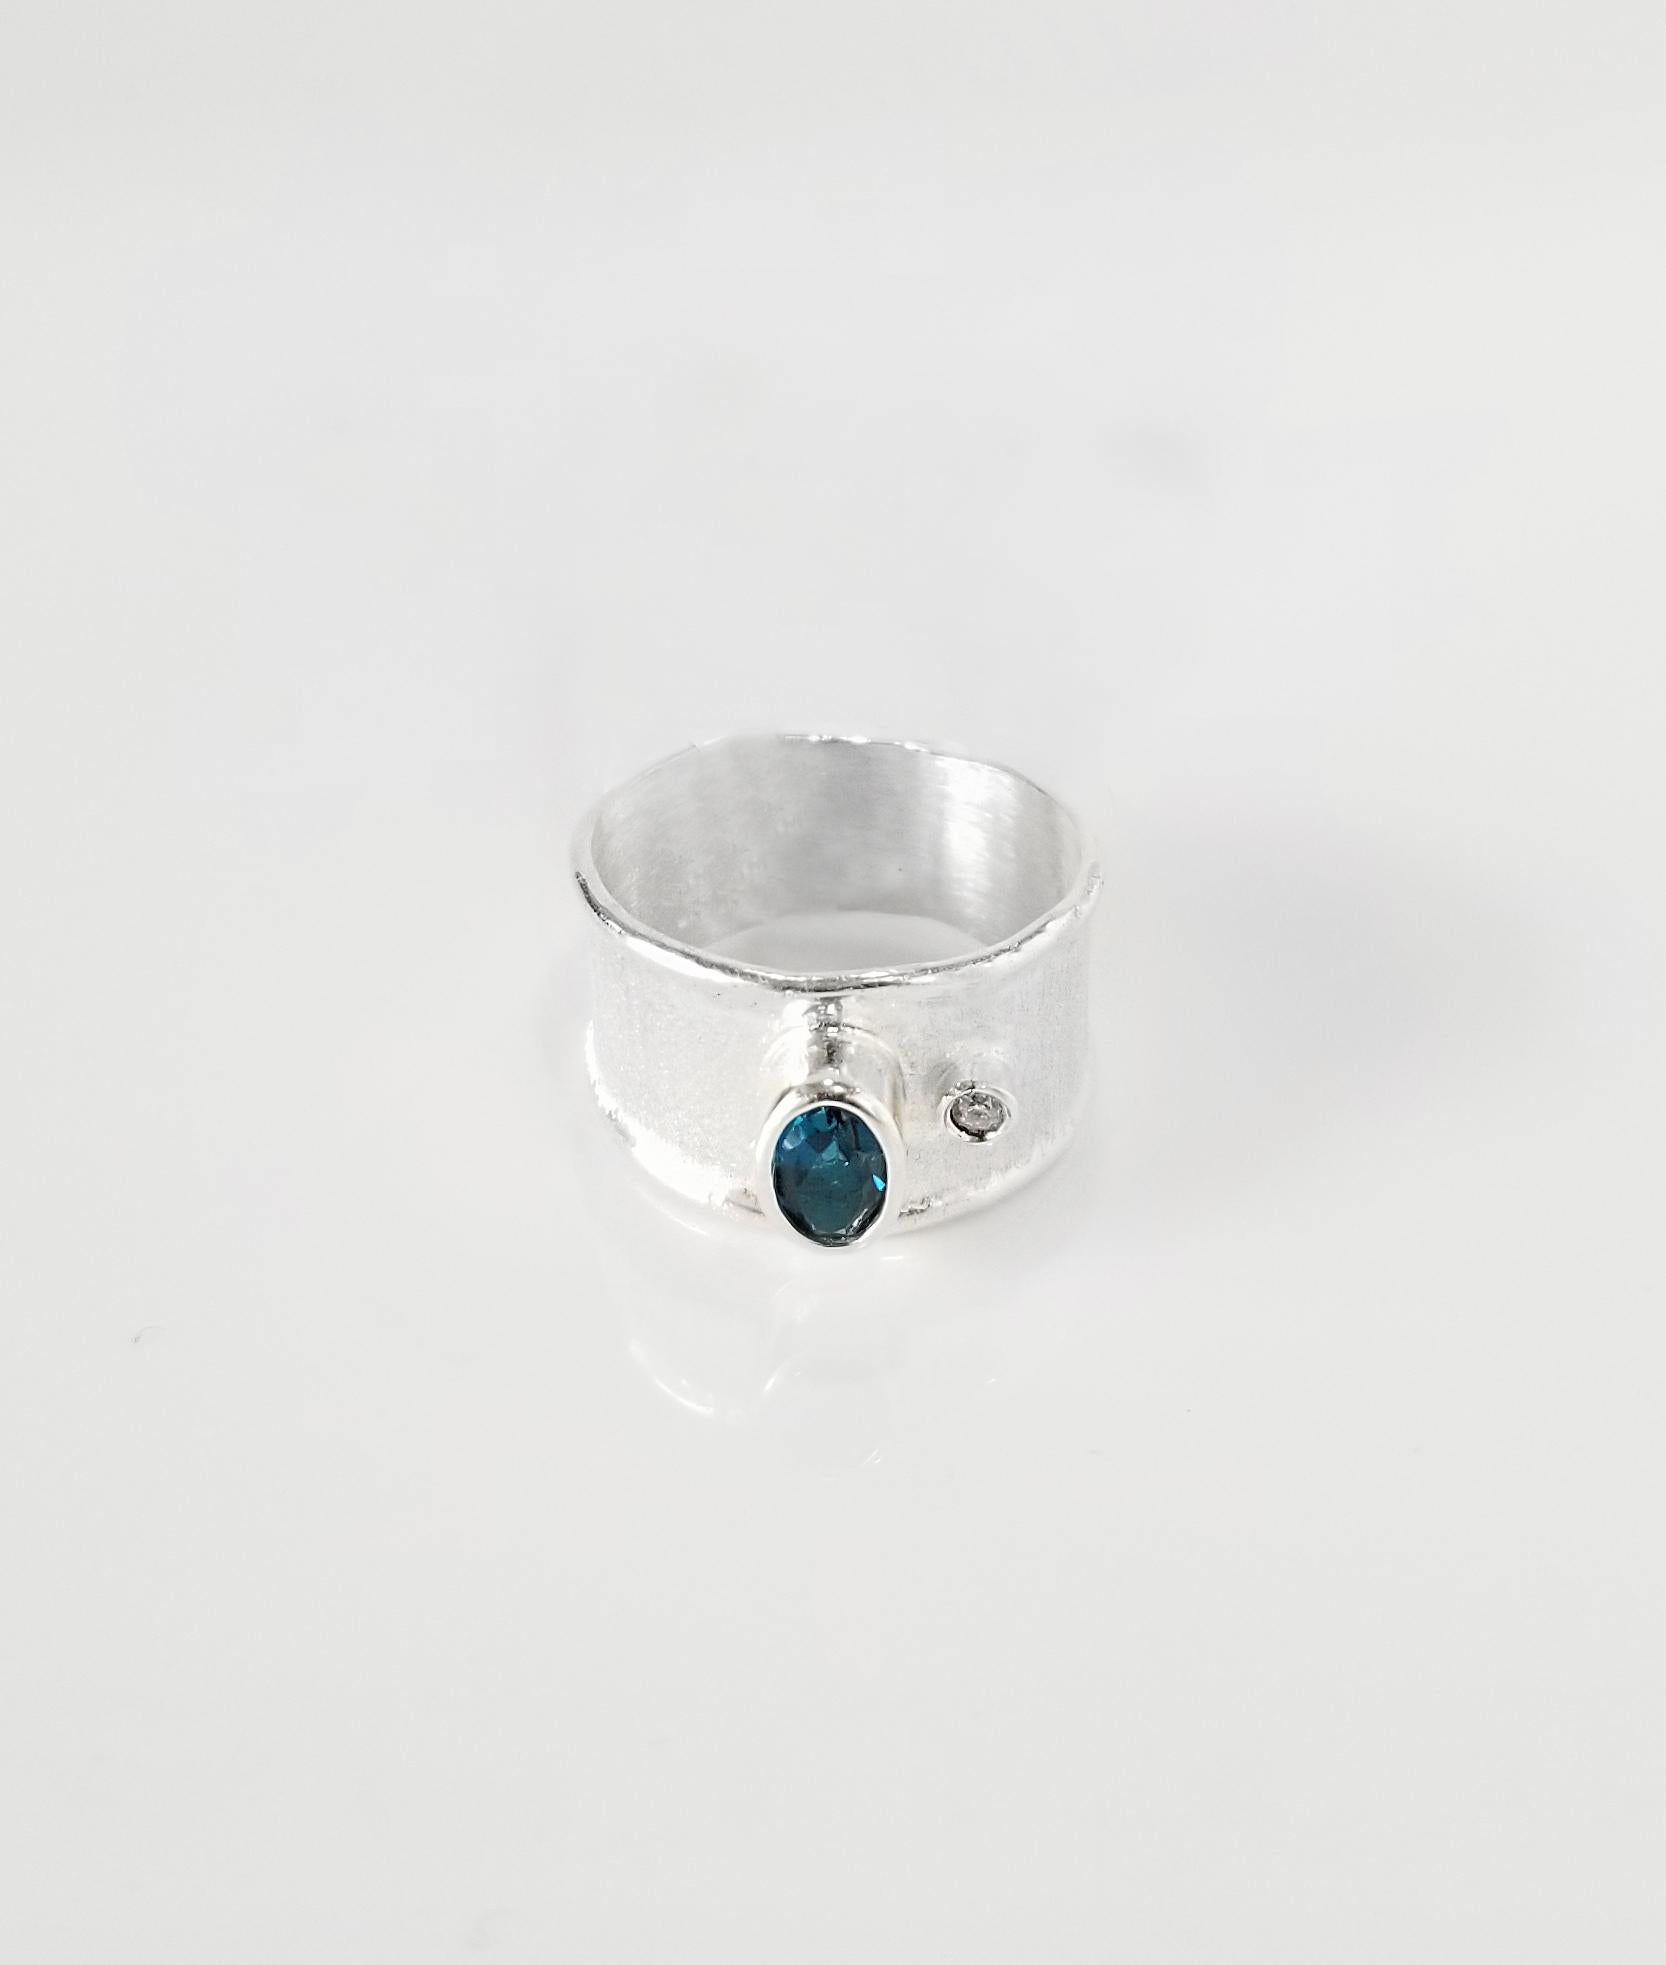 Yianni Creations Ammos Collection 100% Handmade Artisan Ring from Fine Silver featuring 0.40 Carat London Blue Topaz accompanied by 0.03 Carat Brilliant Cut White Diamond complemented by unique techniques of craftsmanship - brushed texture and